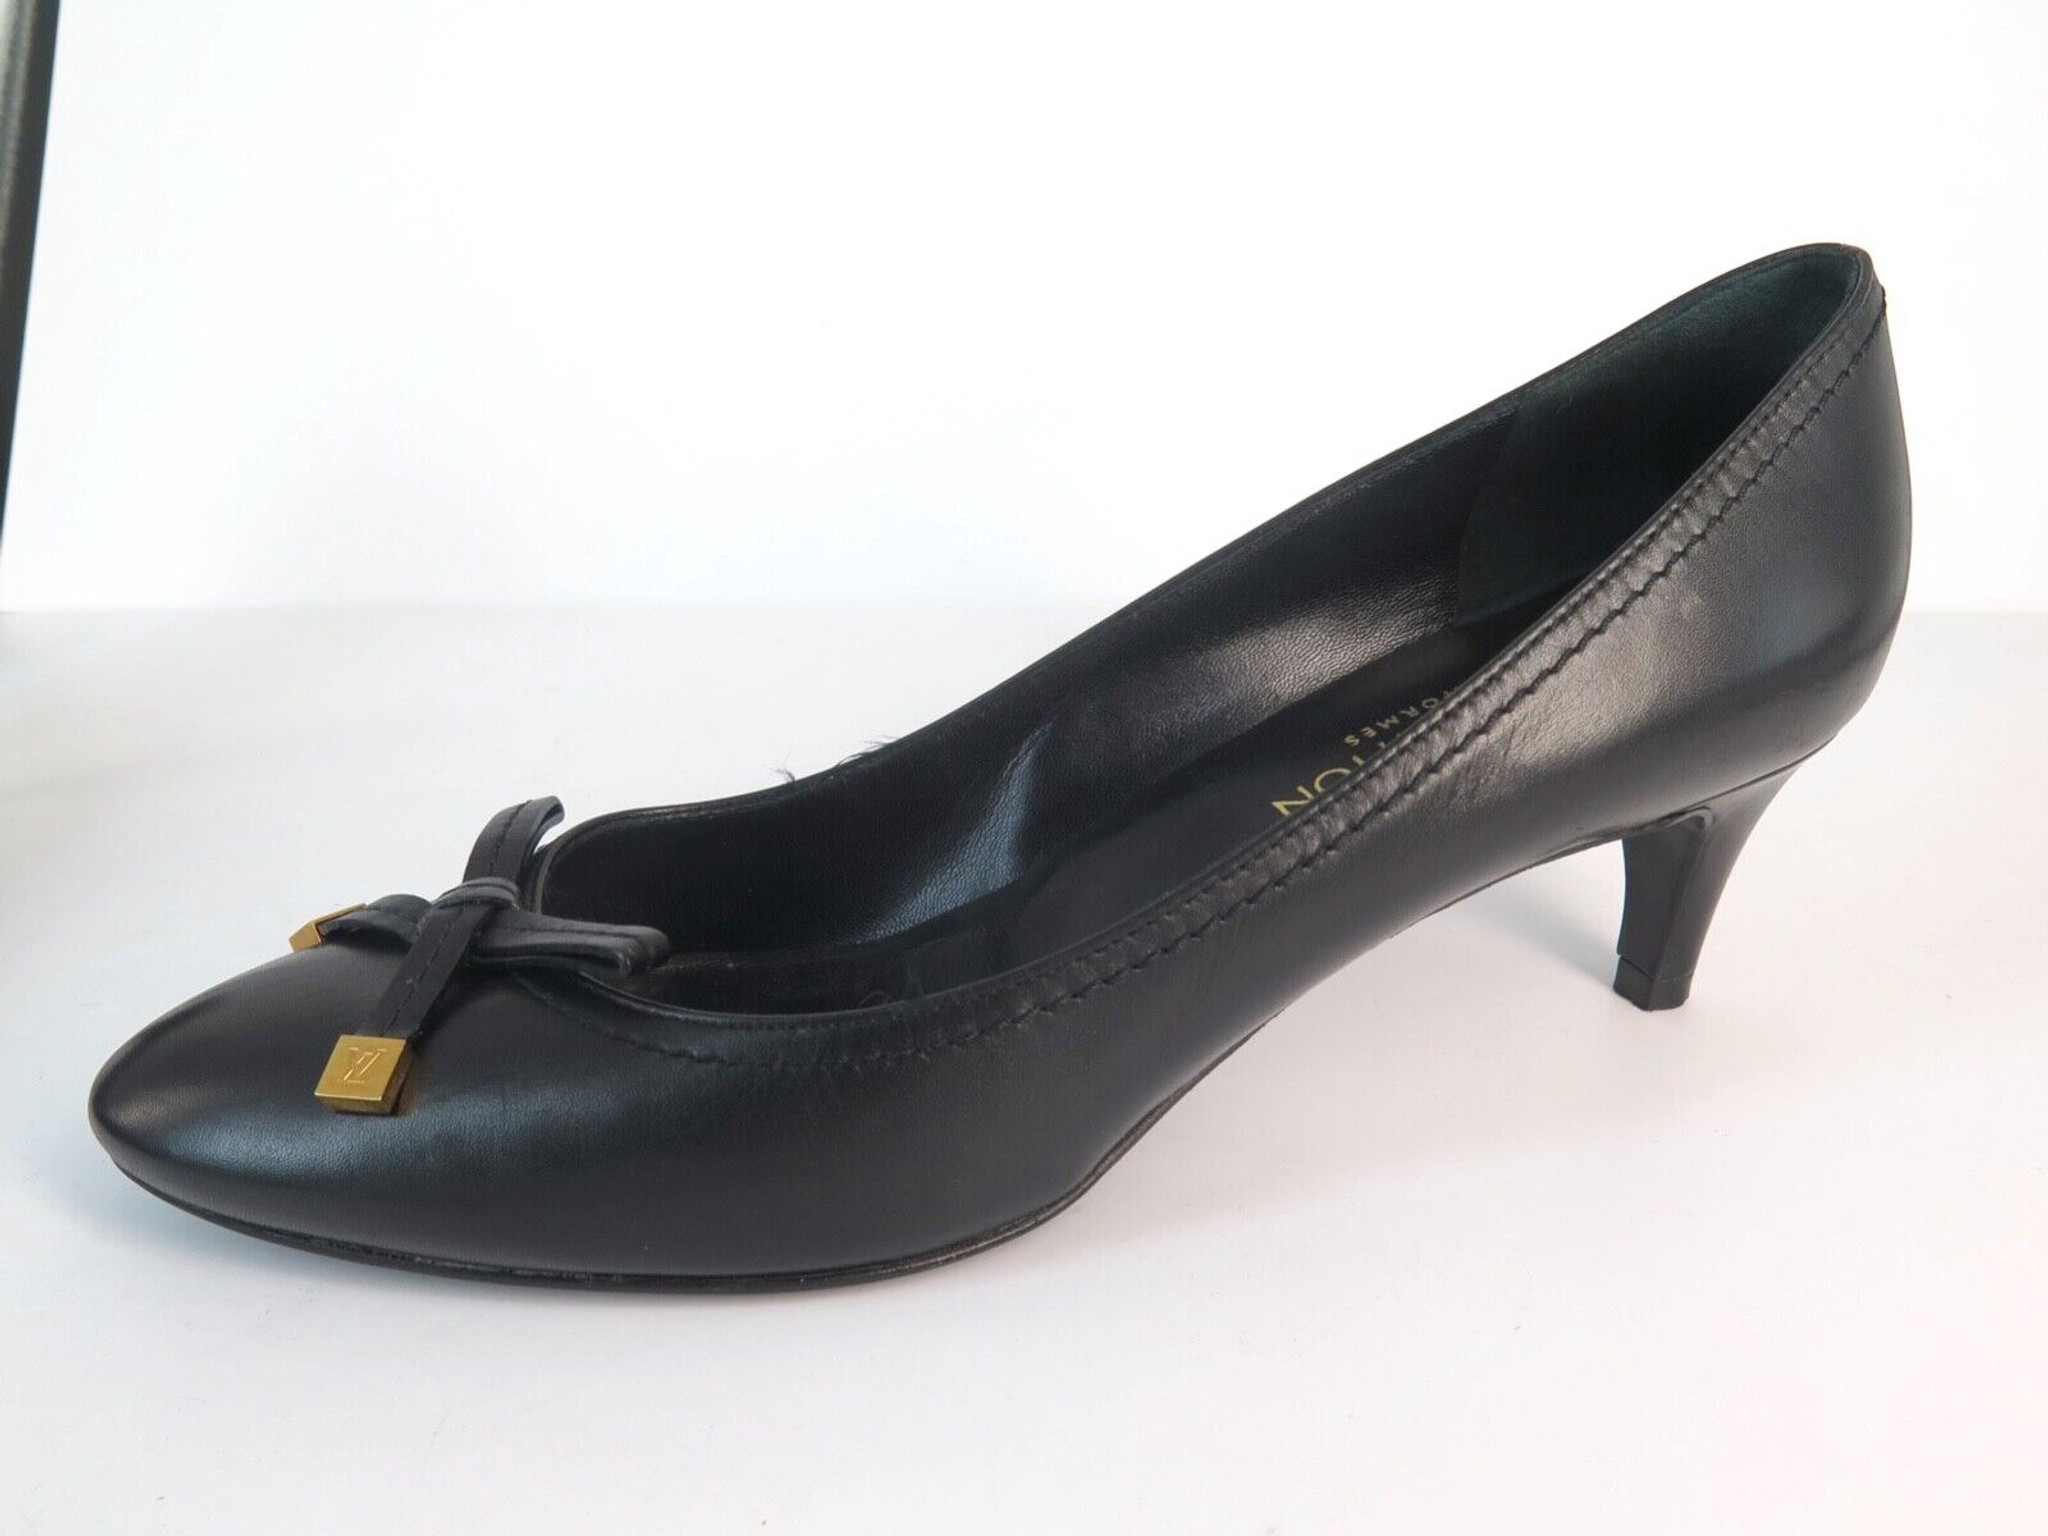 Louis Vuitton Black 'Love Story' Kitten Heel Shoes with Bow, size 36.